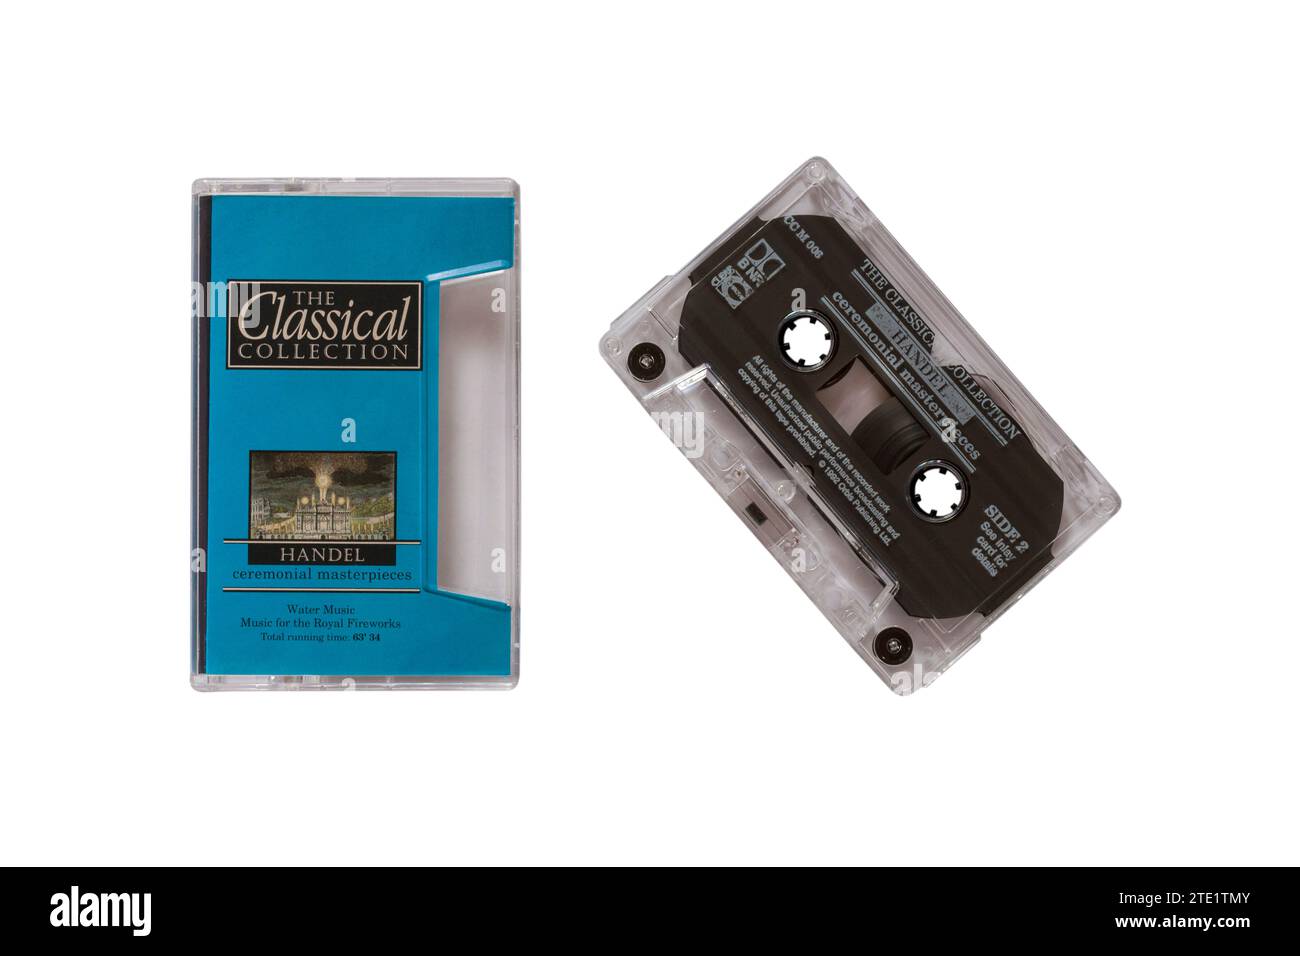 The Classical Collection Handel ceremonial masterpieces cassette tape removed from case isolated on white background - classical music Stock Photo